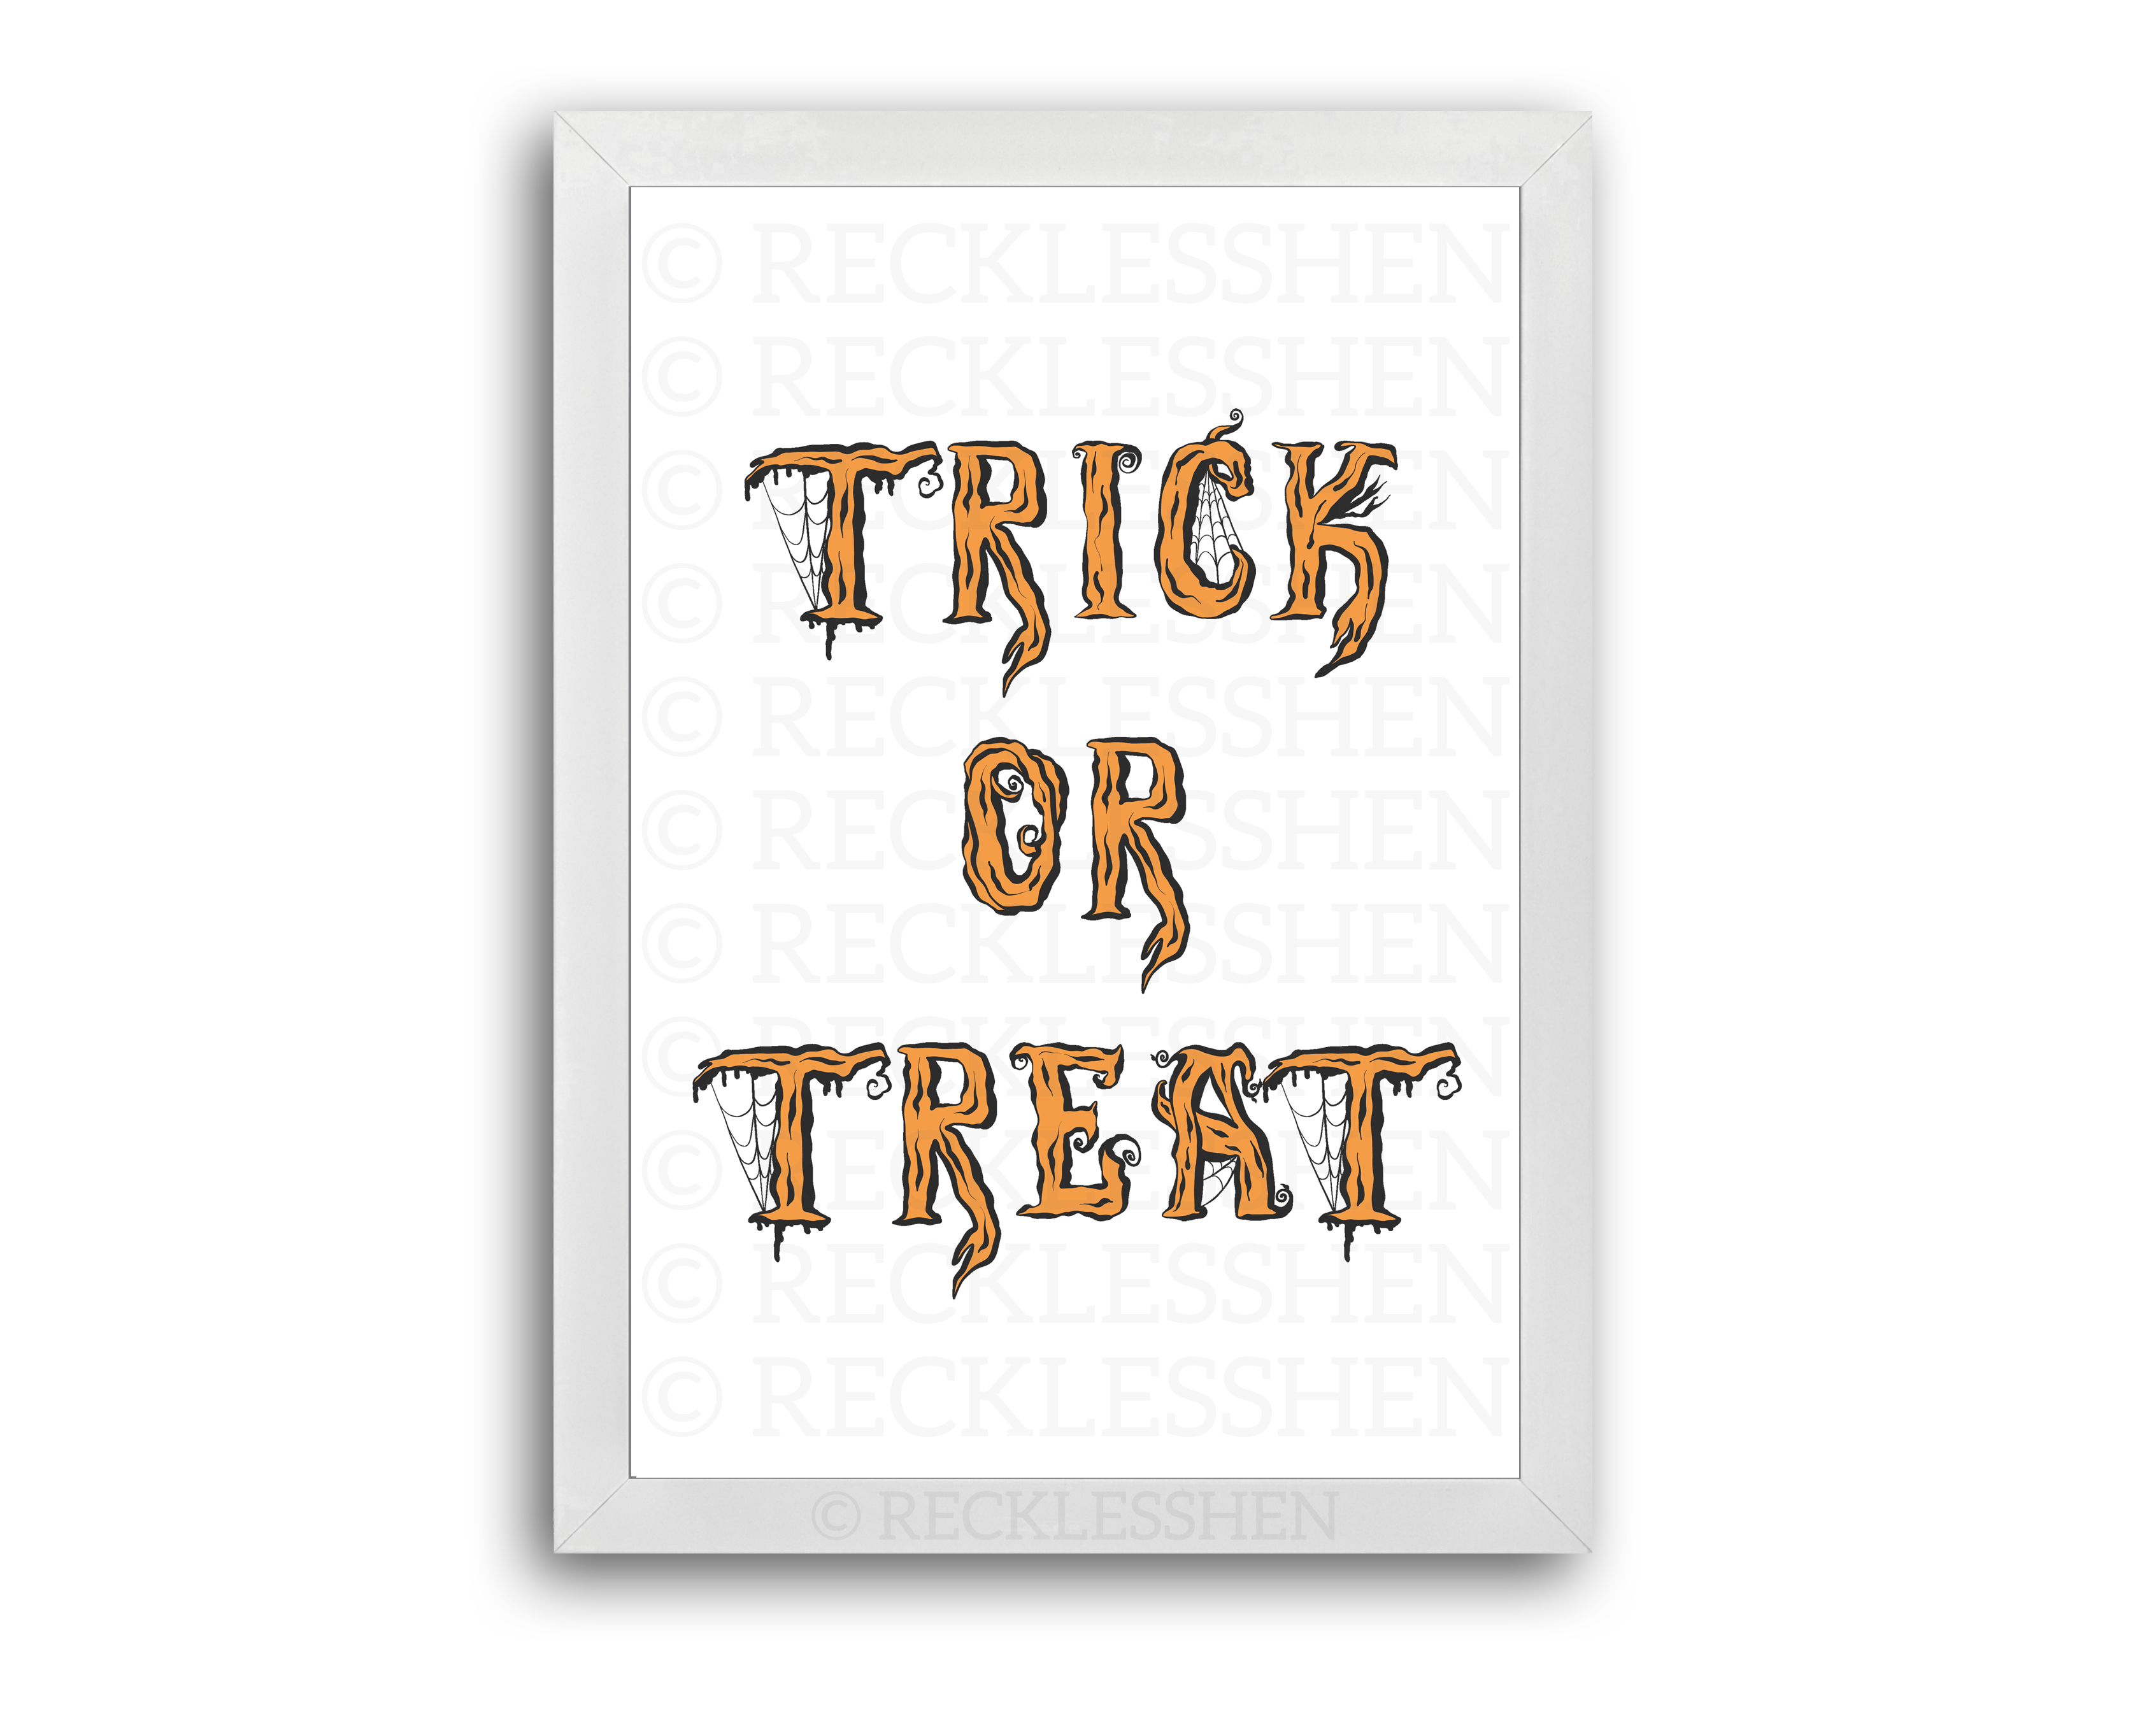 Trick or Treat - A4 Print RecklessHen 